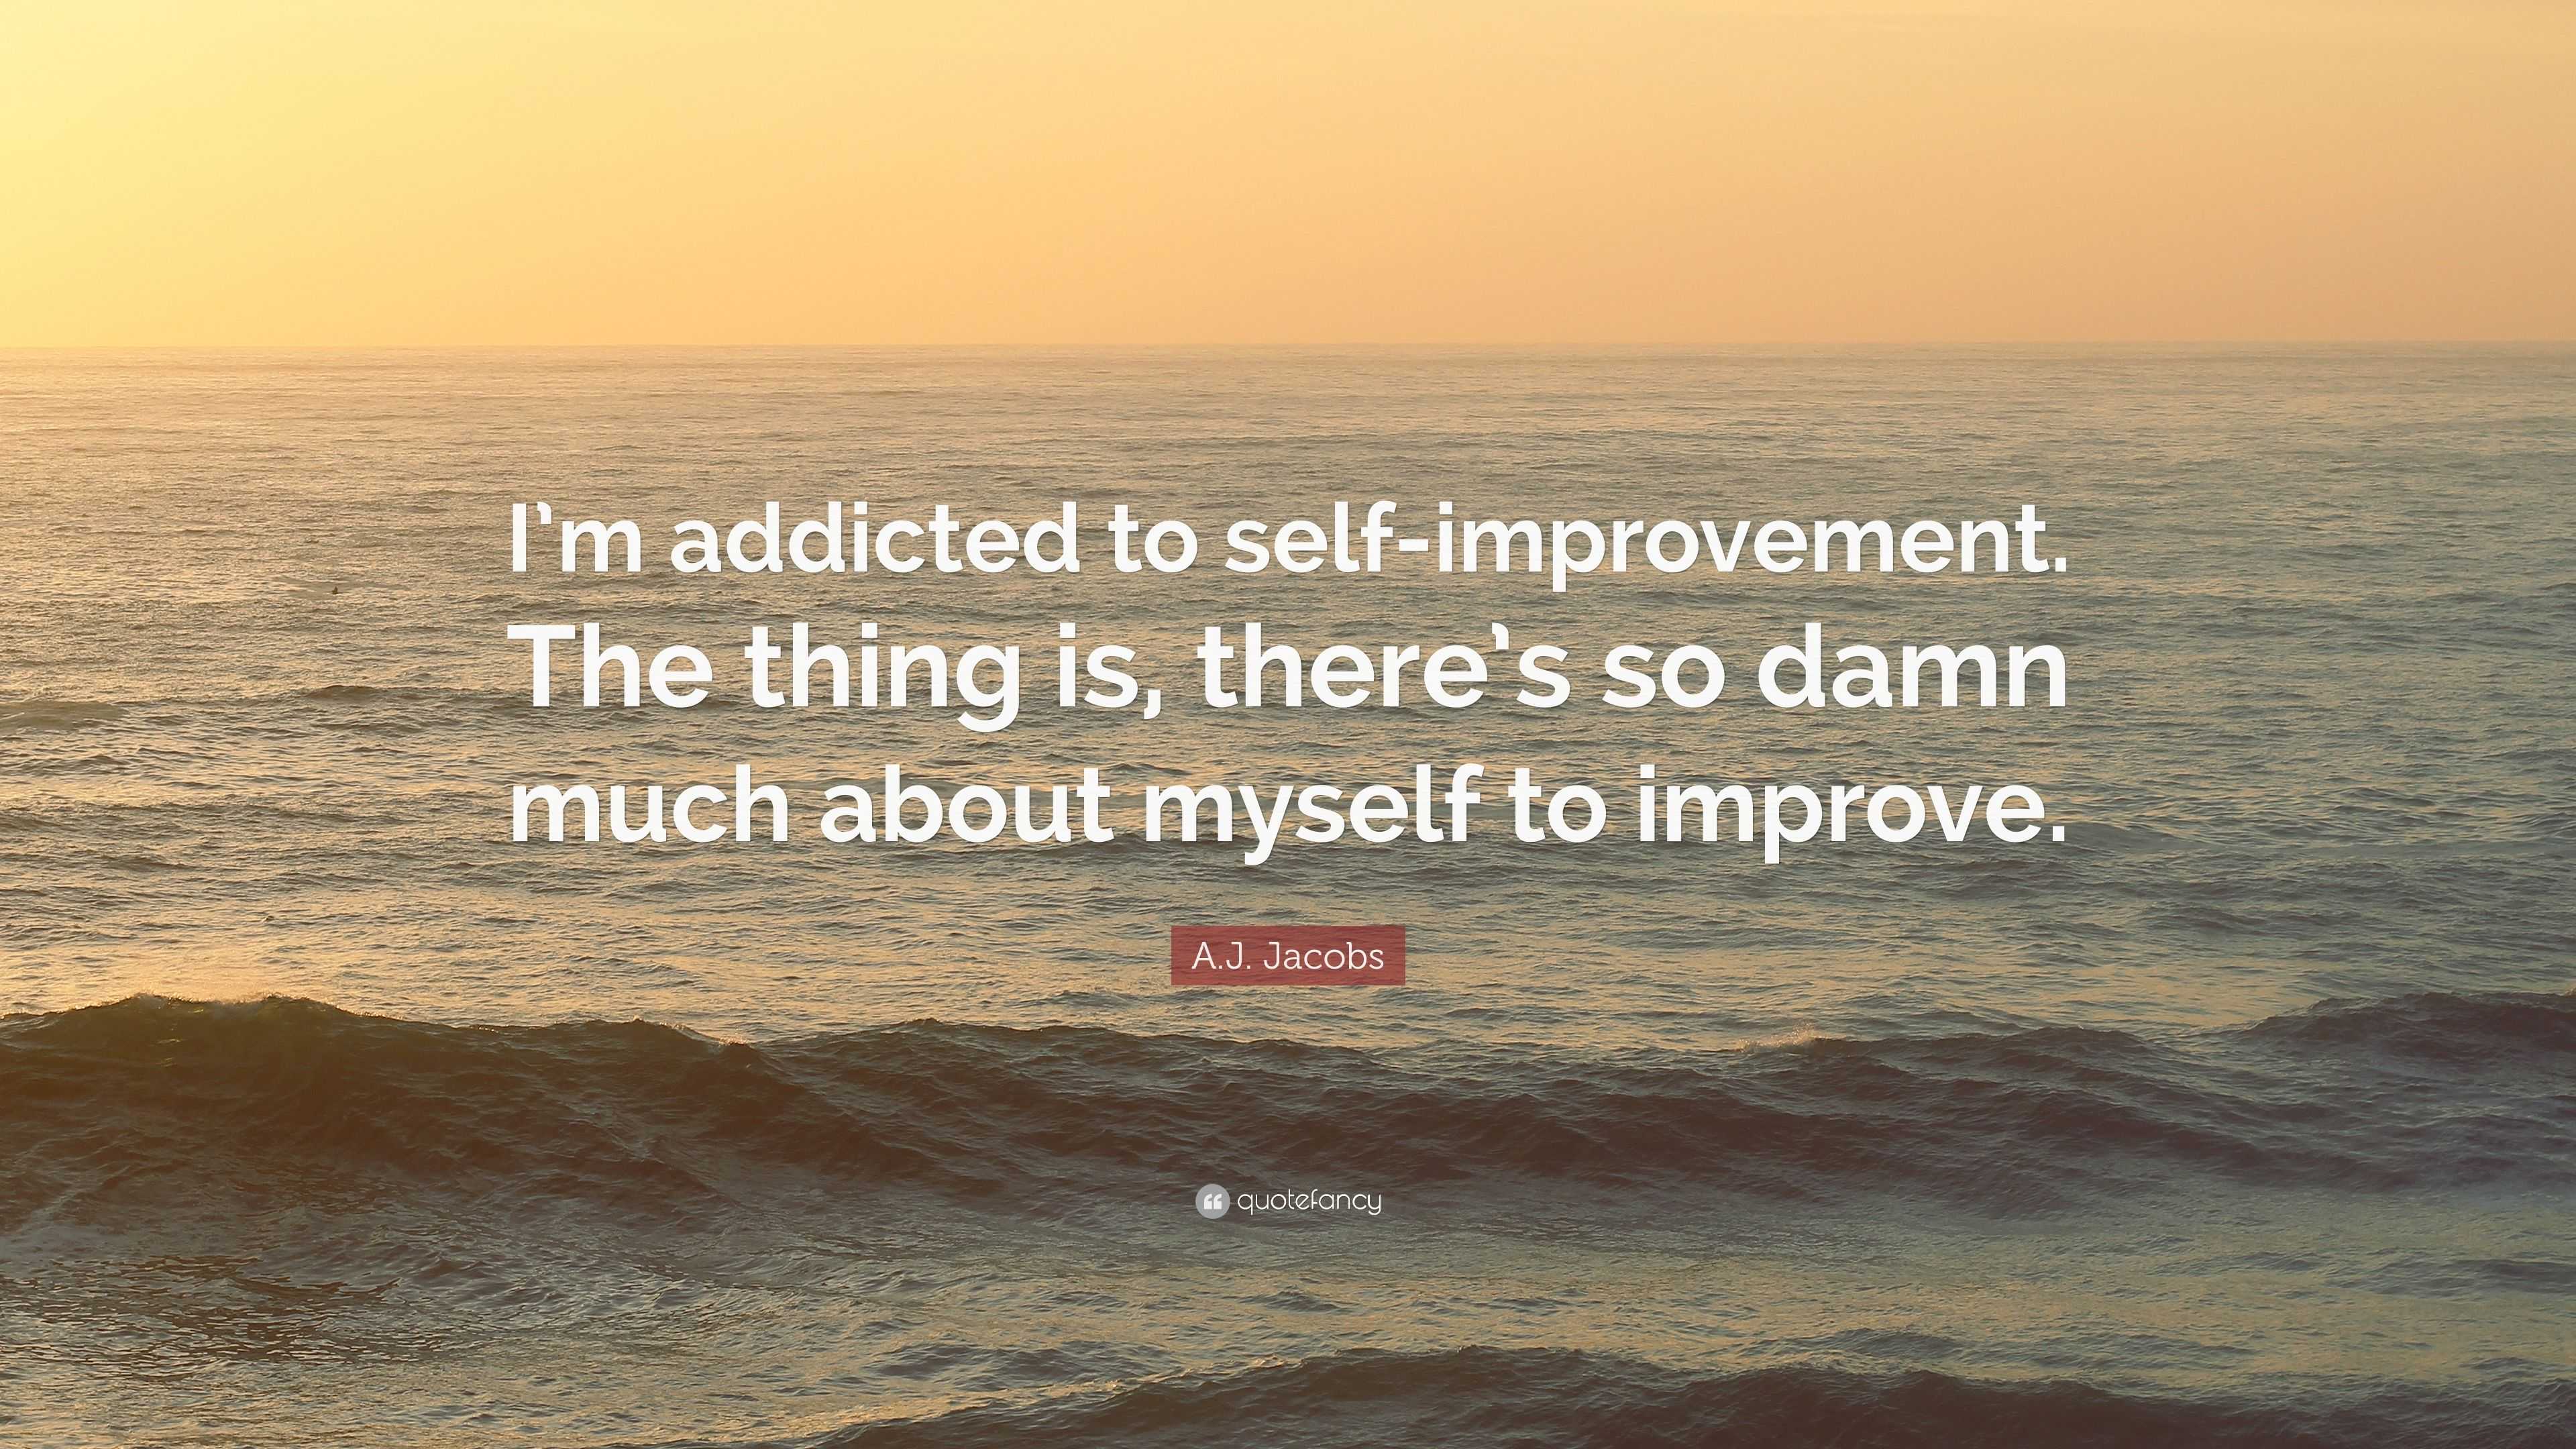 A.J. Jacobs Quote: “I’m addicted to self-improvement. The thing is